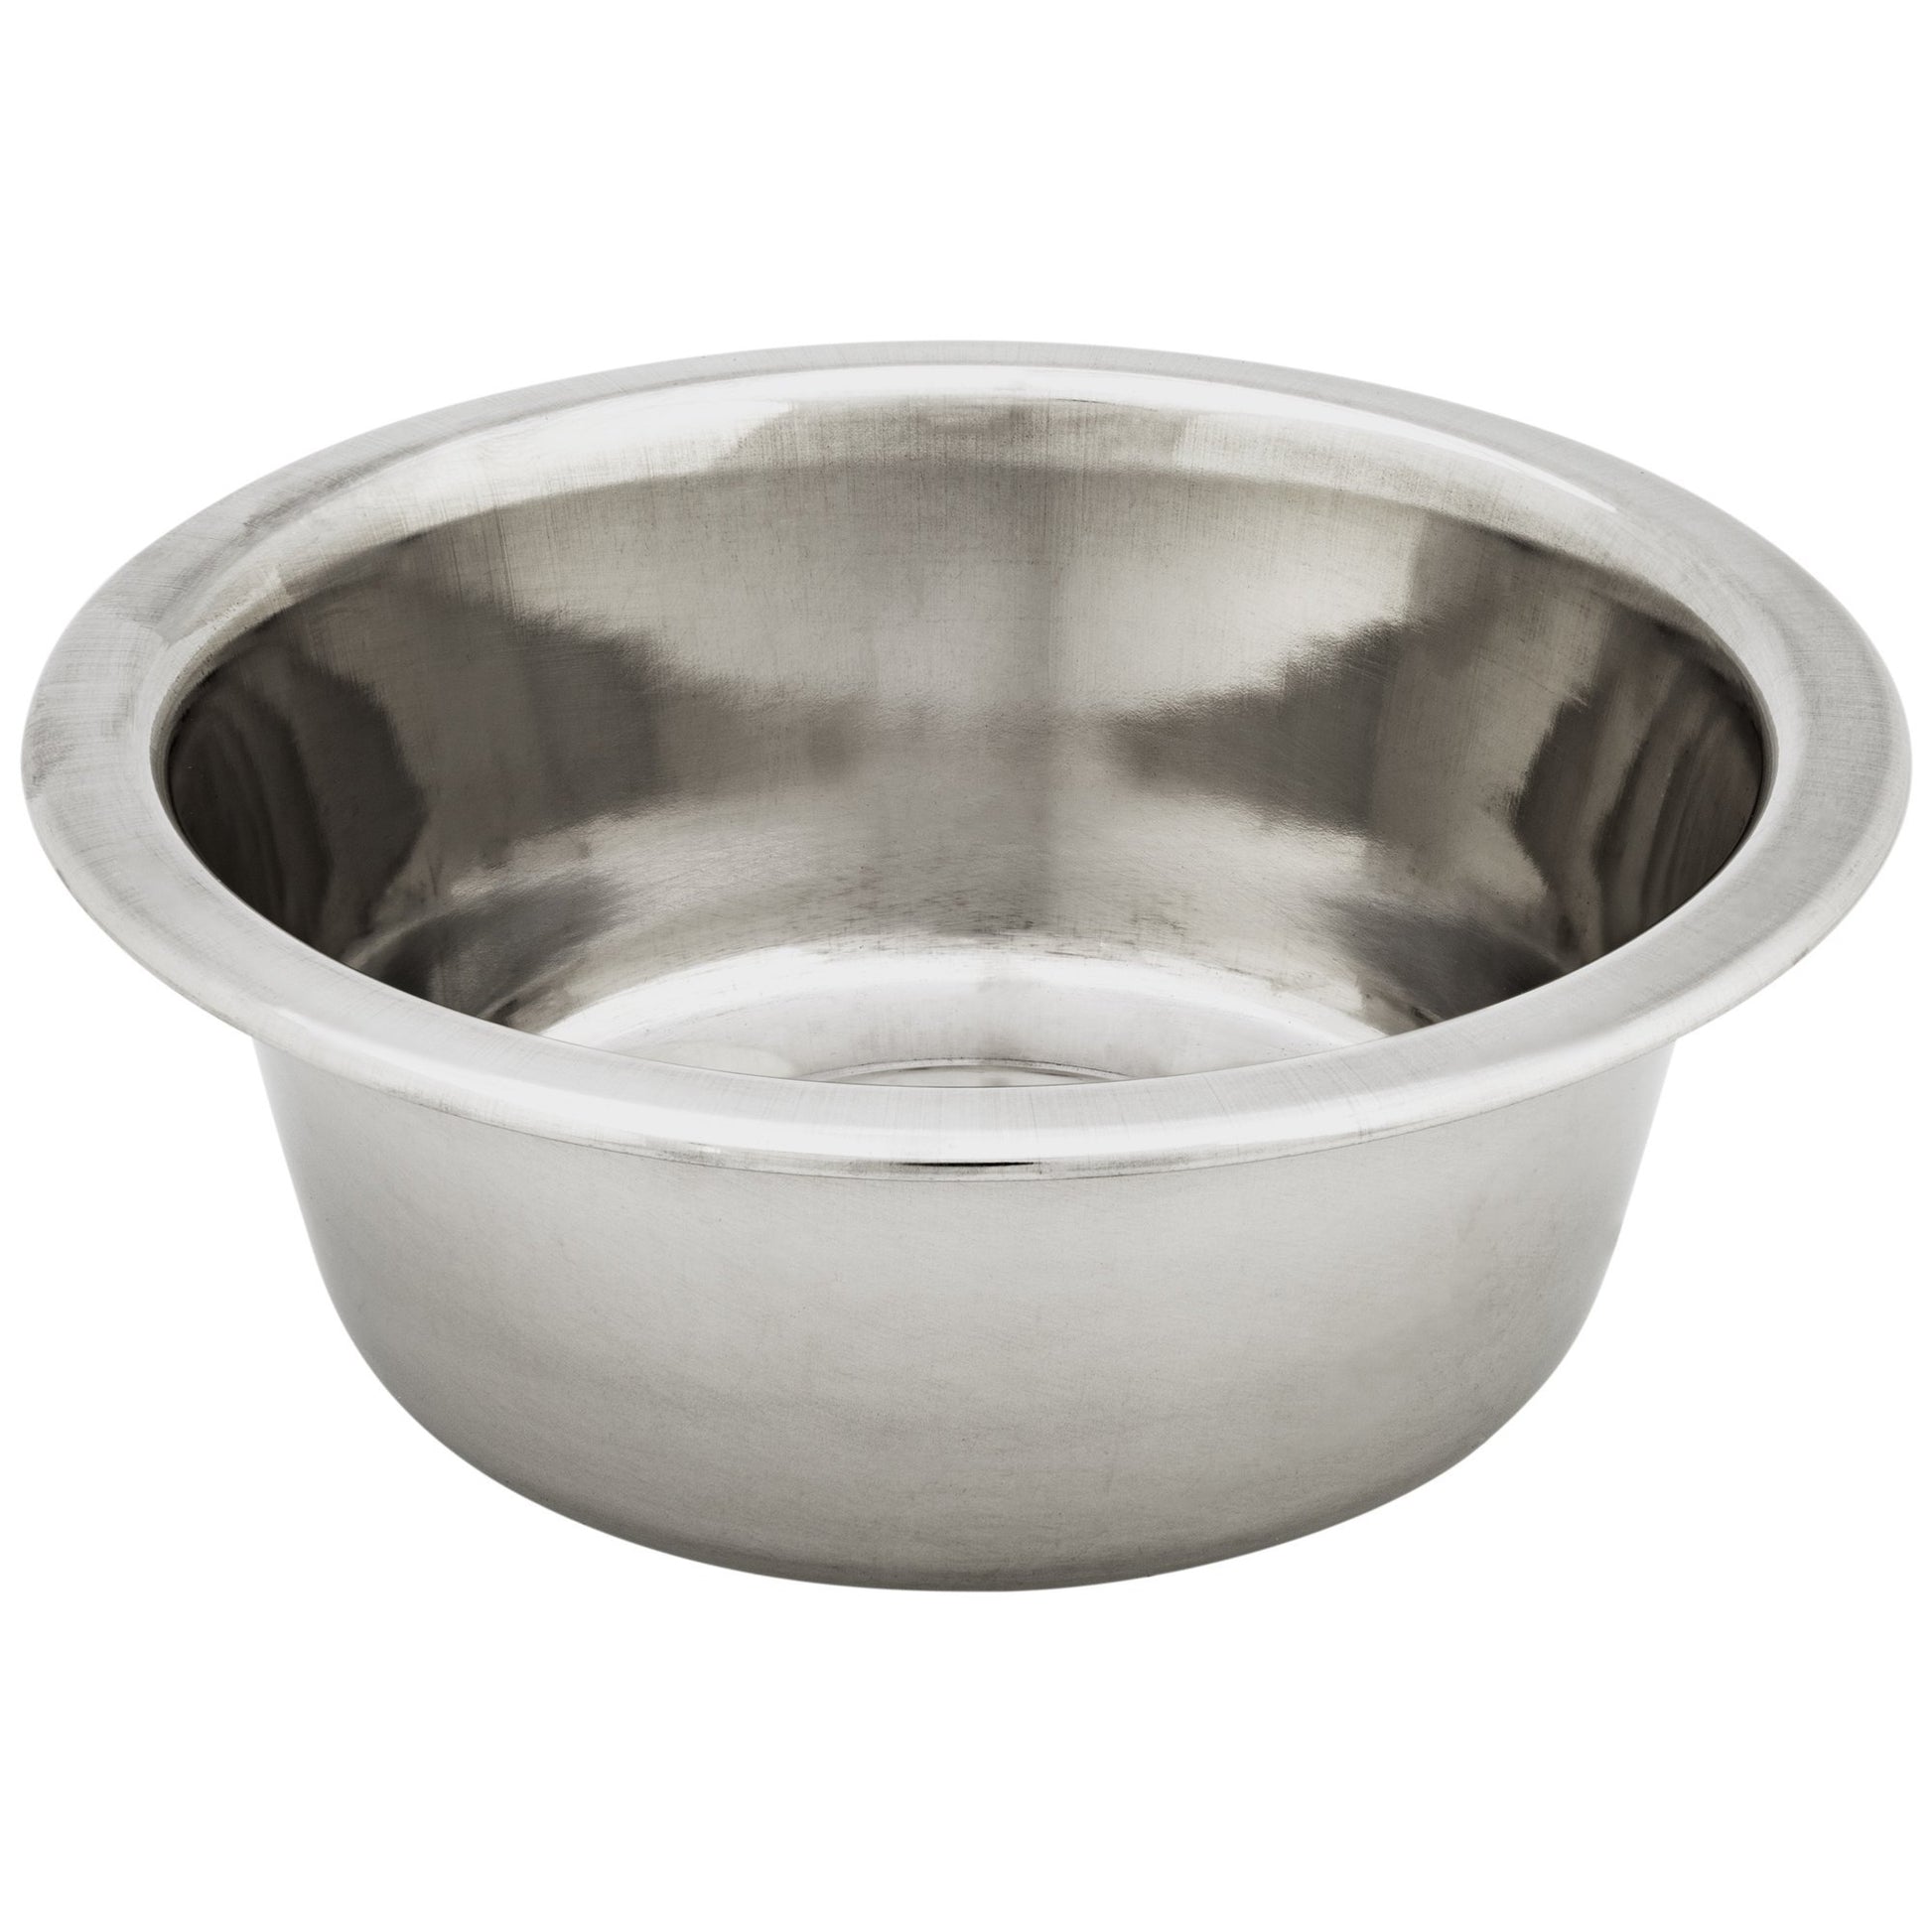 Stainless Steel Pet Dish